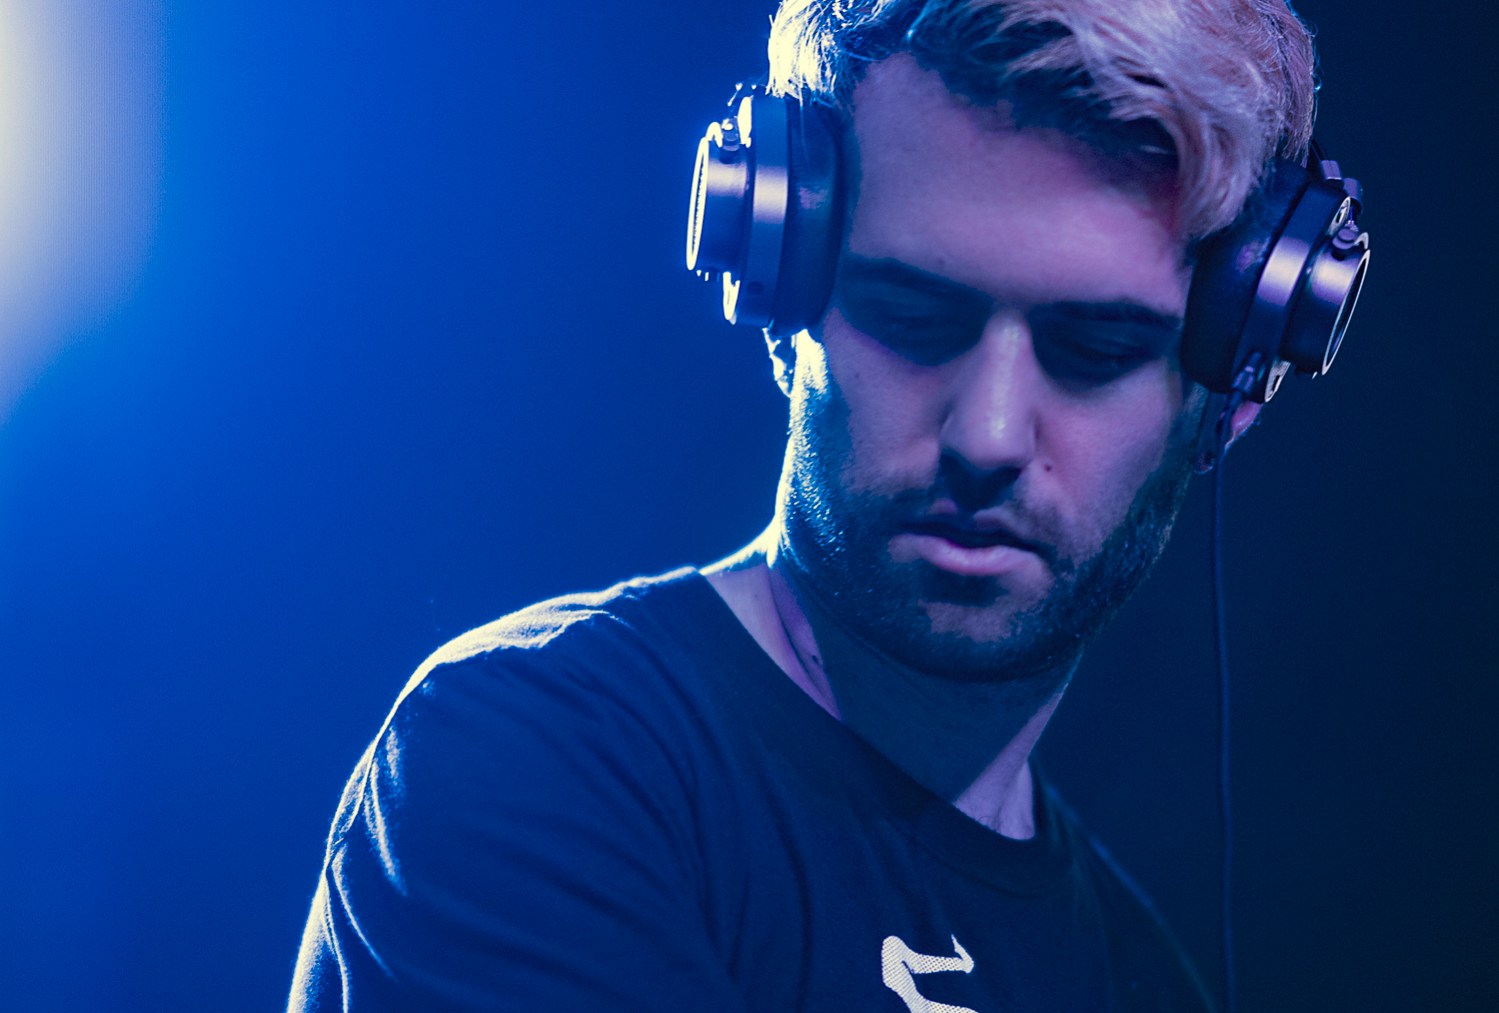 DJ A-Trak performing and wearing Master and Dynamic headphones